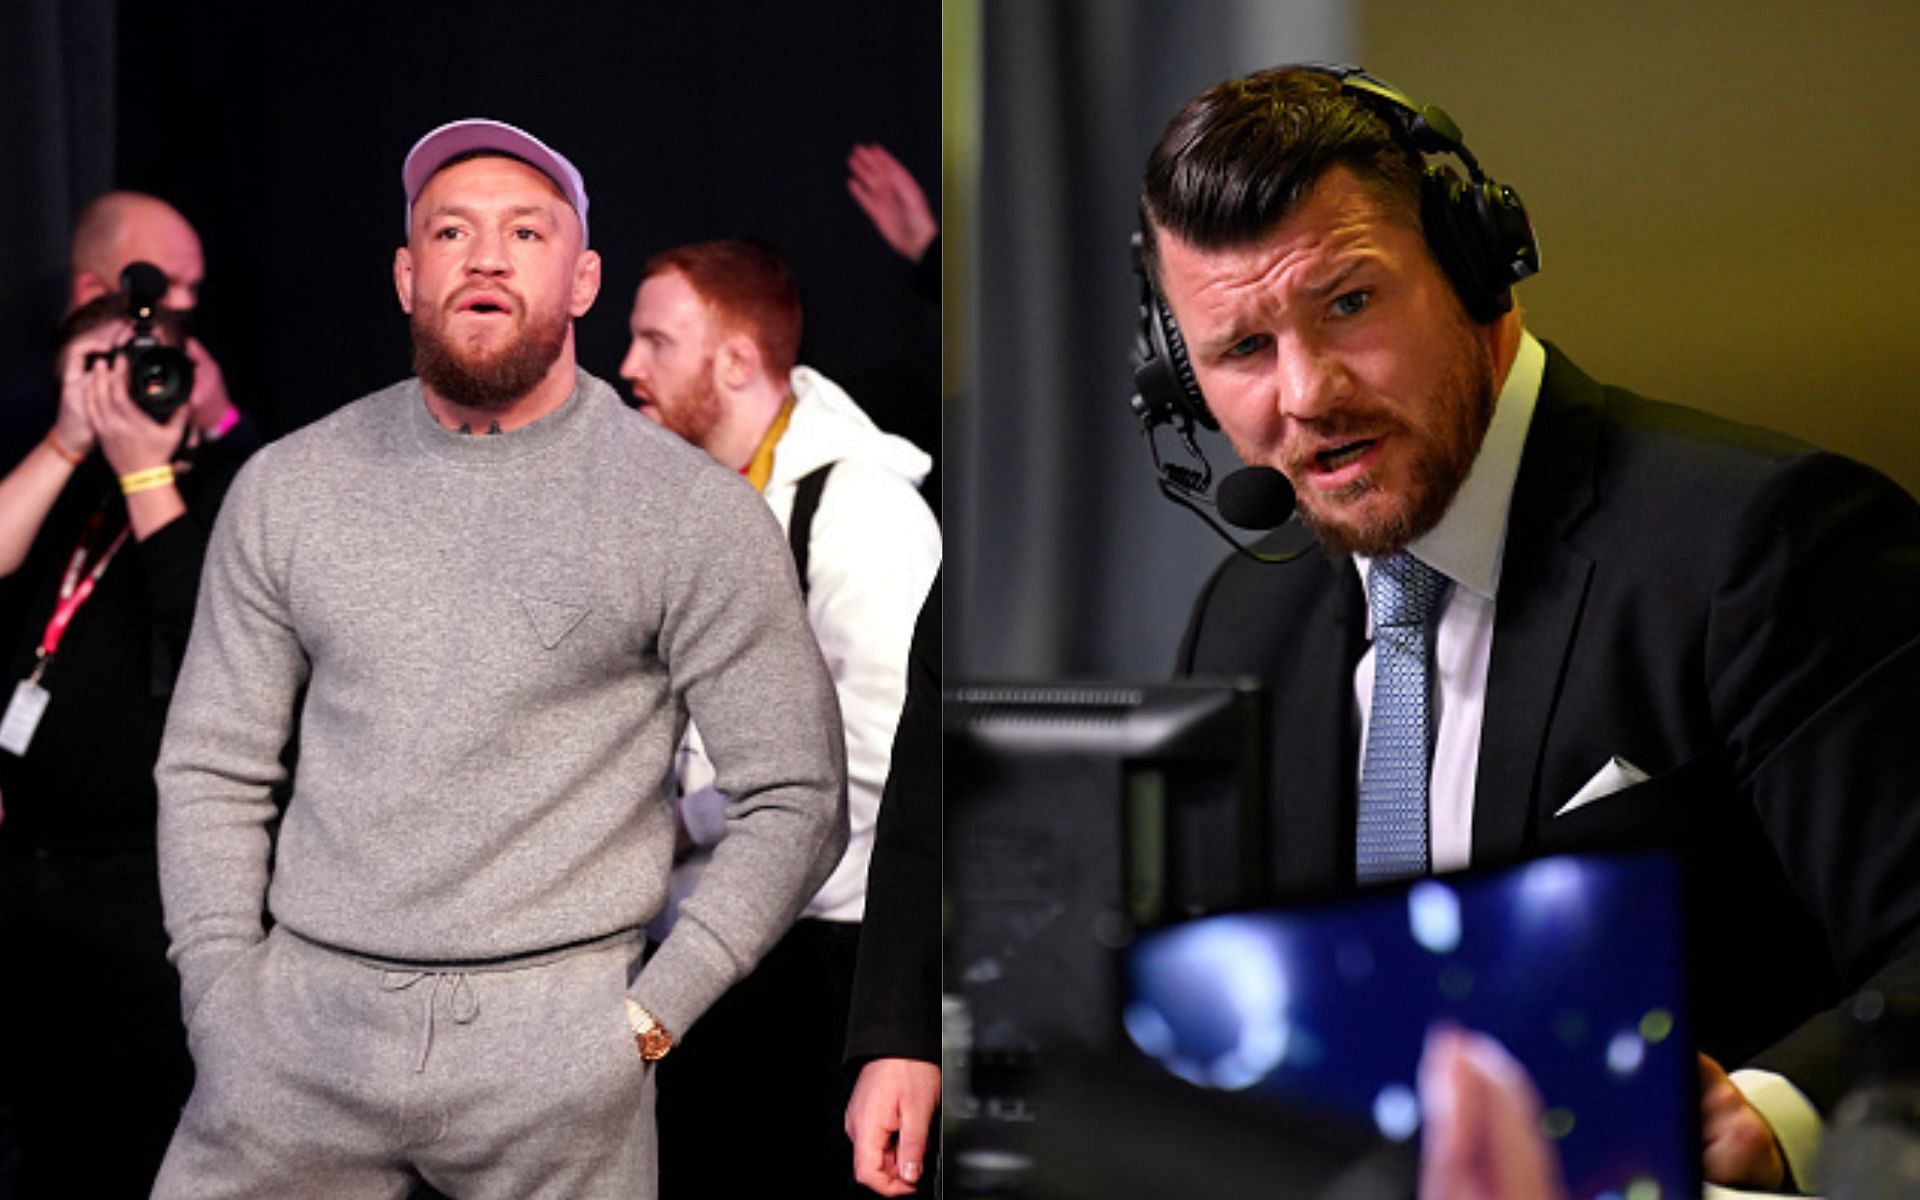 Conor McGregor (left) and Michael Bisping (right) (Images via Getty)